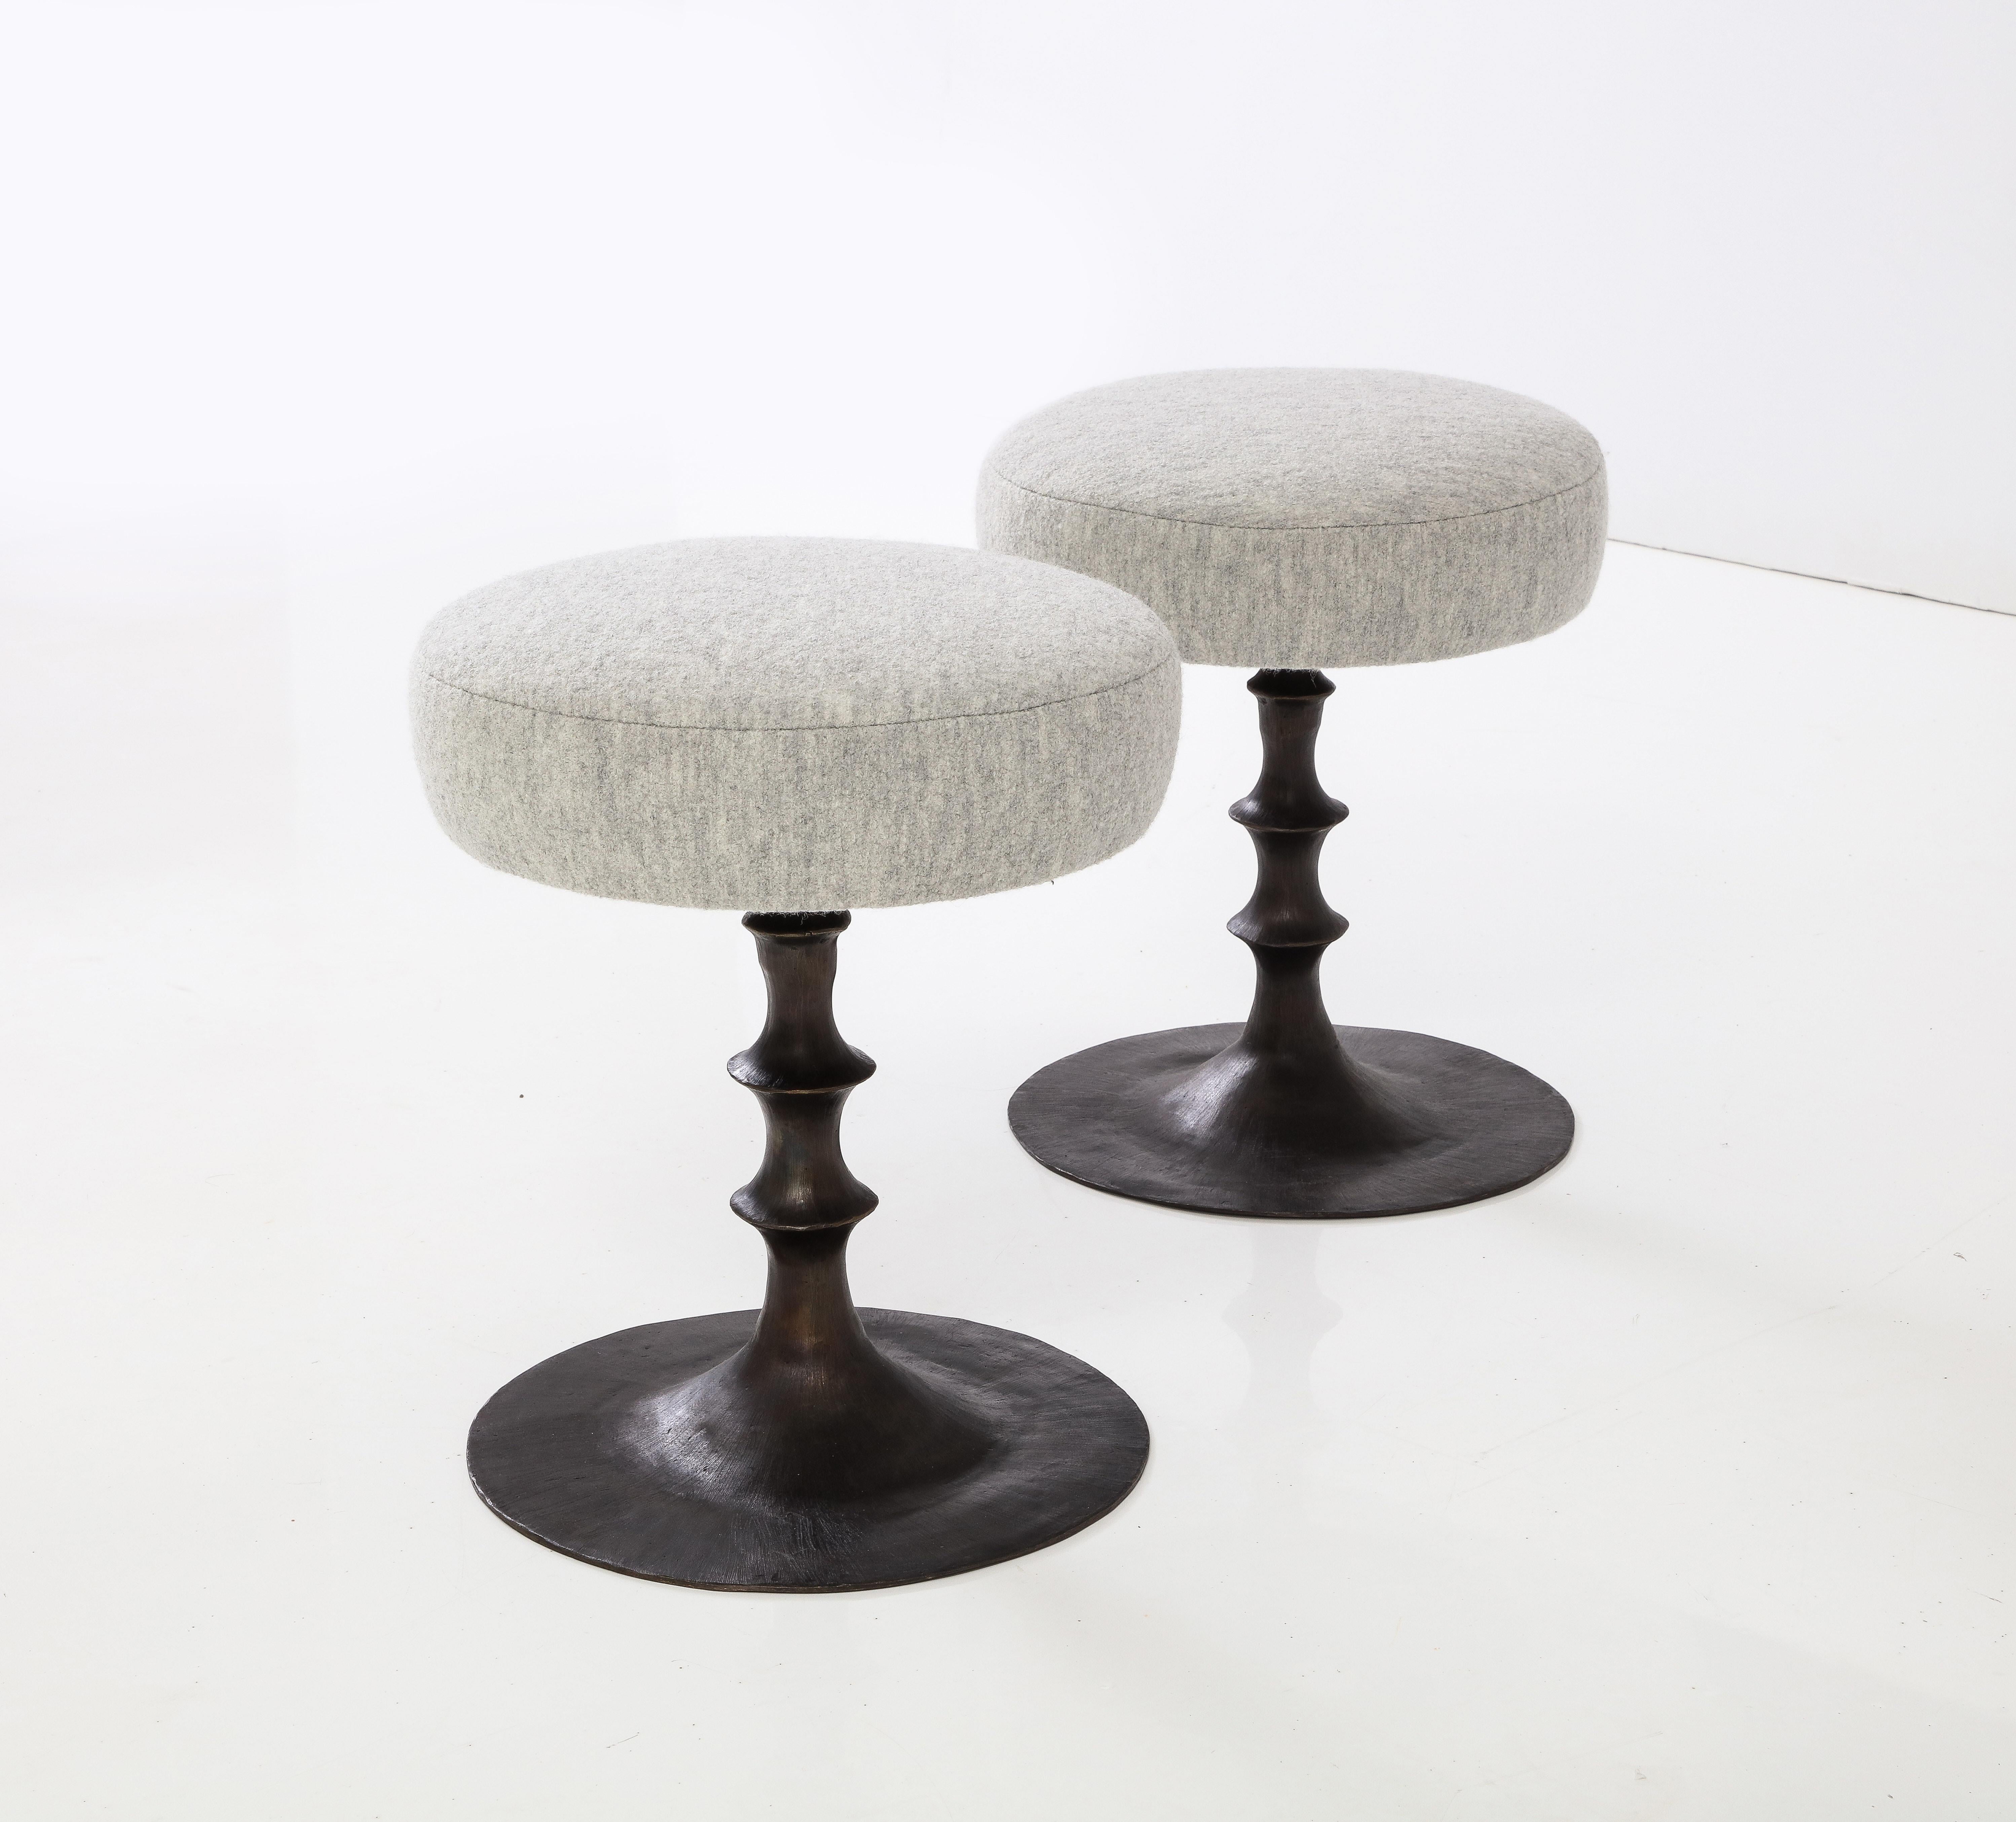 These St Paul stools are an ideal occasional elegant seating option . The organic modern leg is artfully cast in solid bronze . The circular seat cushion completes the outstanding design. This pair has been created with a grey wool cushion. Stools